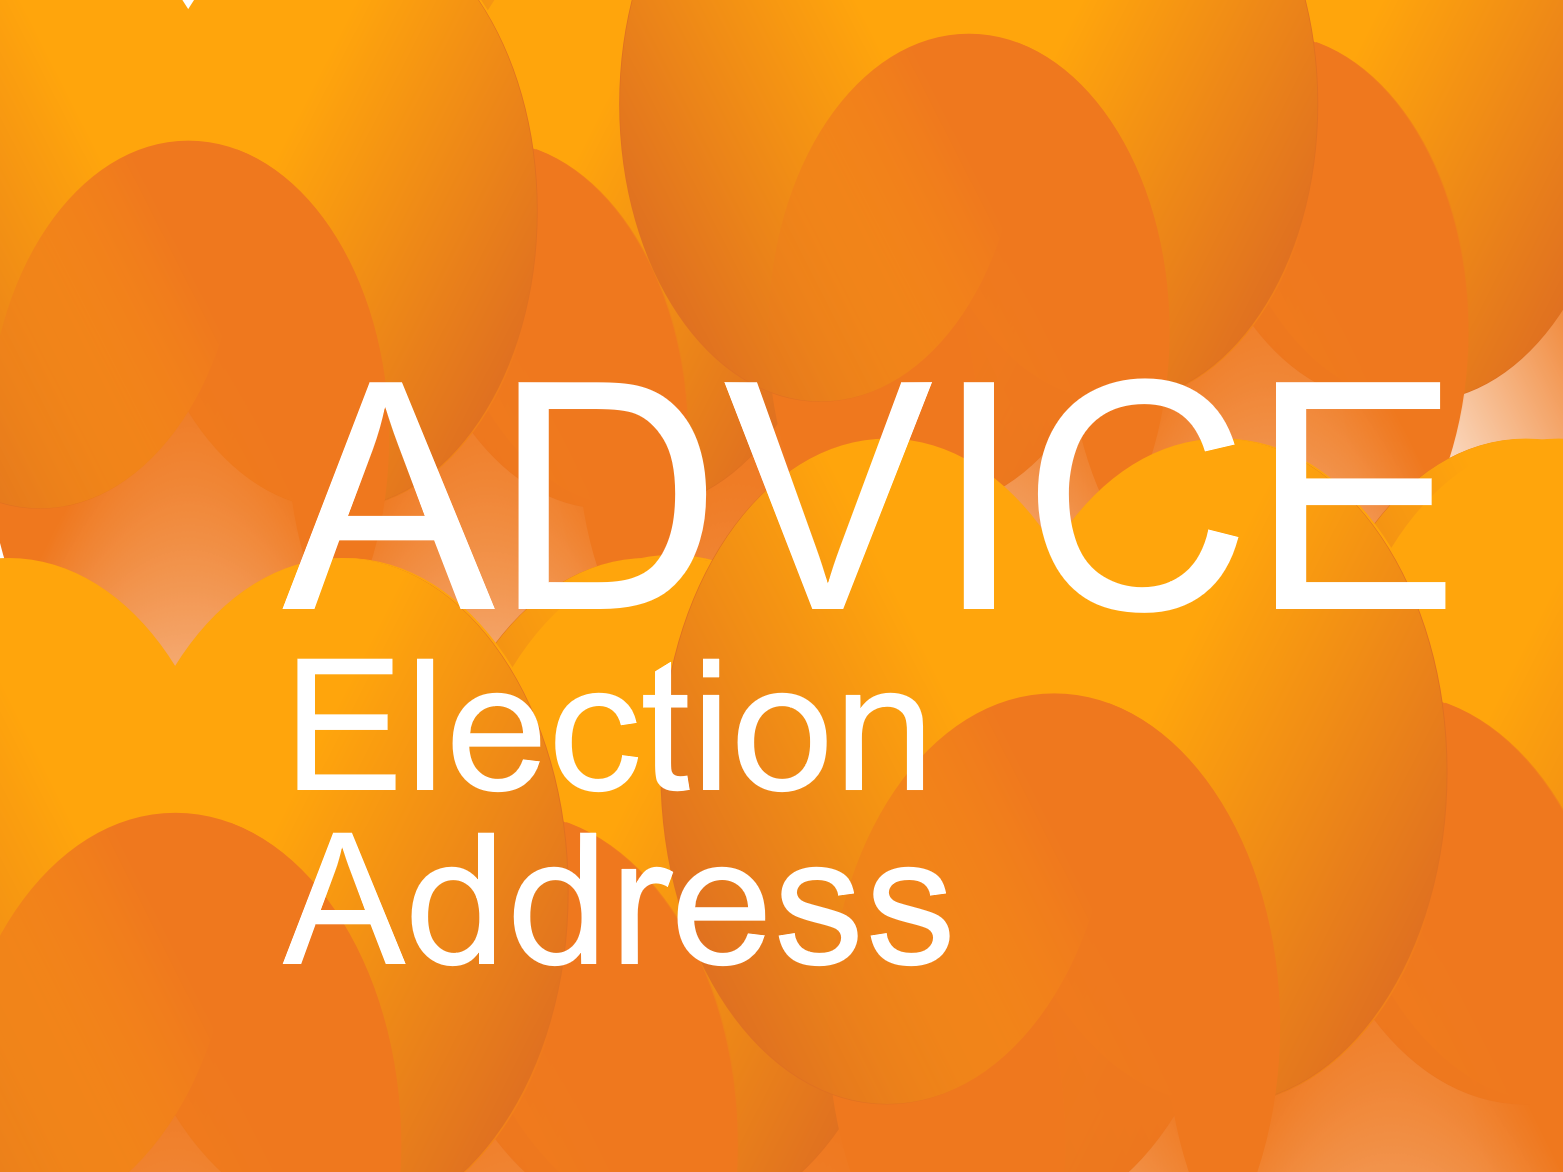 Advice: Election Address and the Royal Mail Election Website